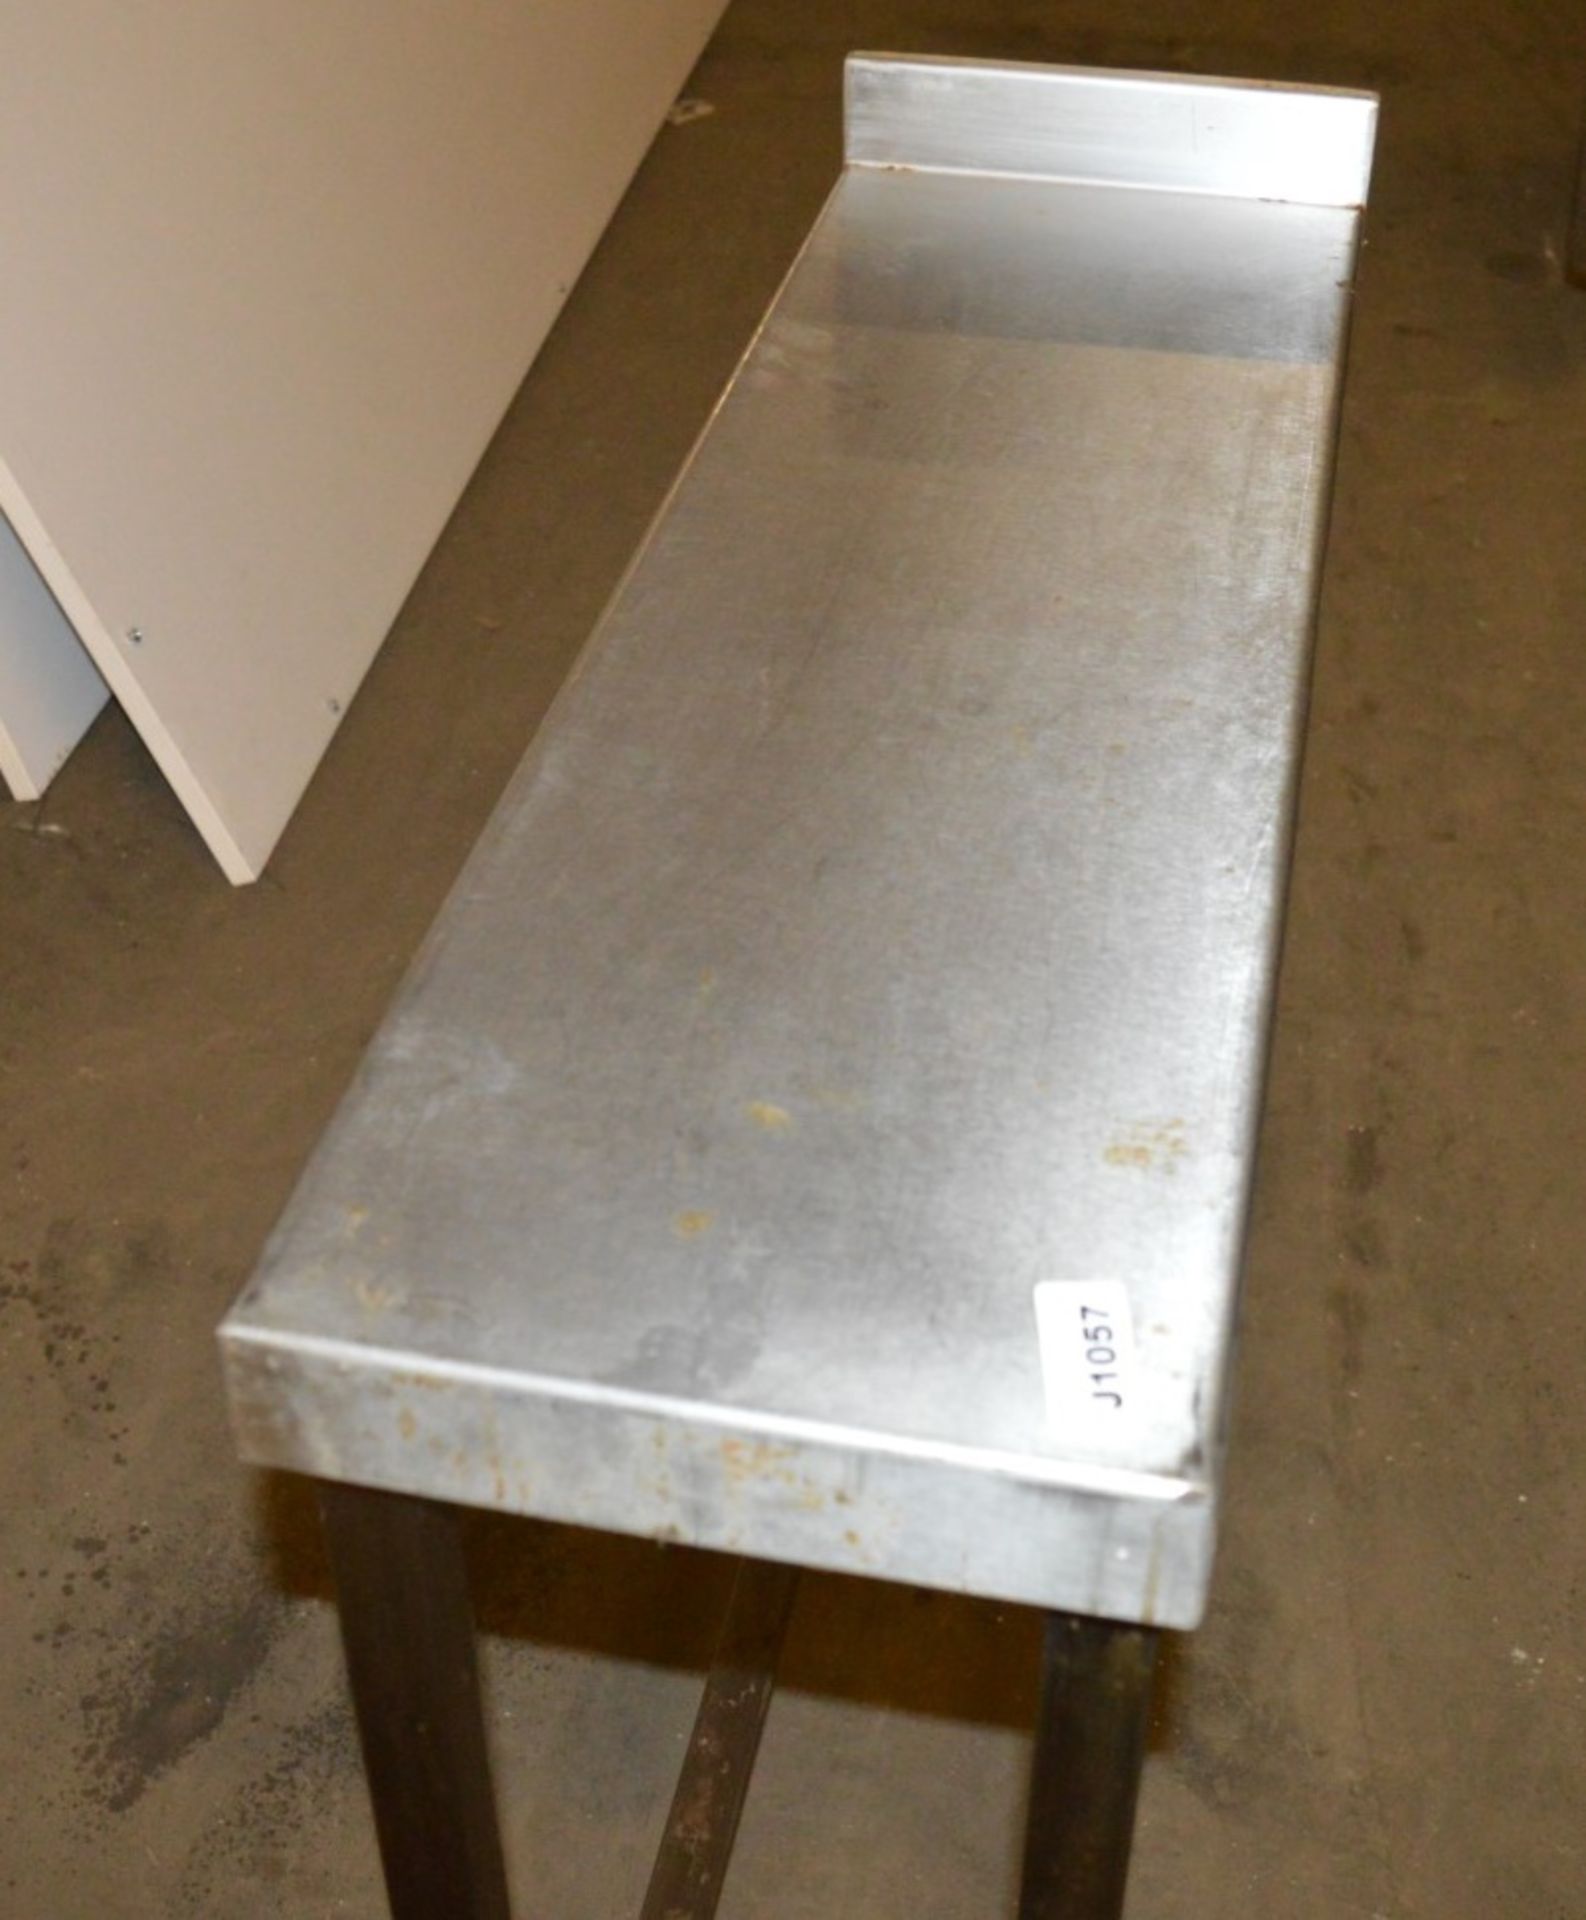 1 x Stainless Steel Infill Table - CL011 - Ref J1057 - H90 x W25 x D80 cms - Location: Bolton - Image 2 of 2